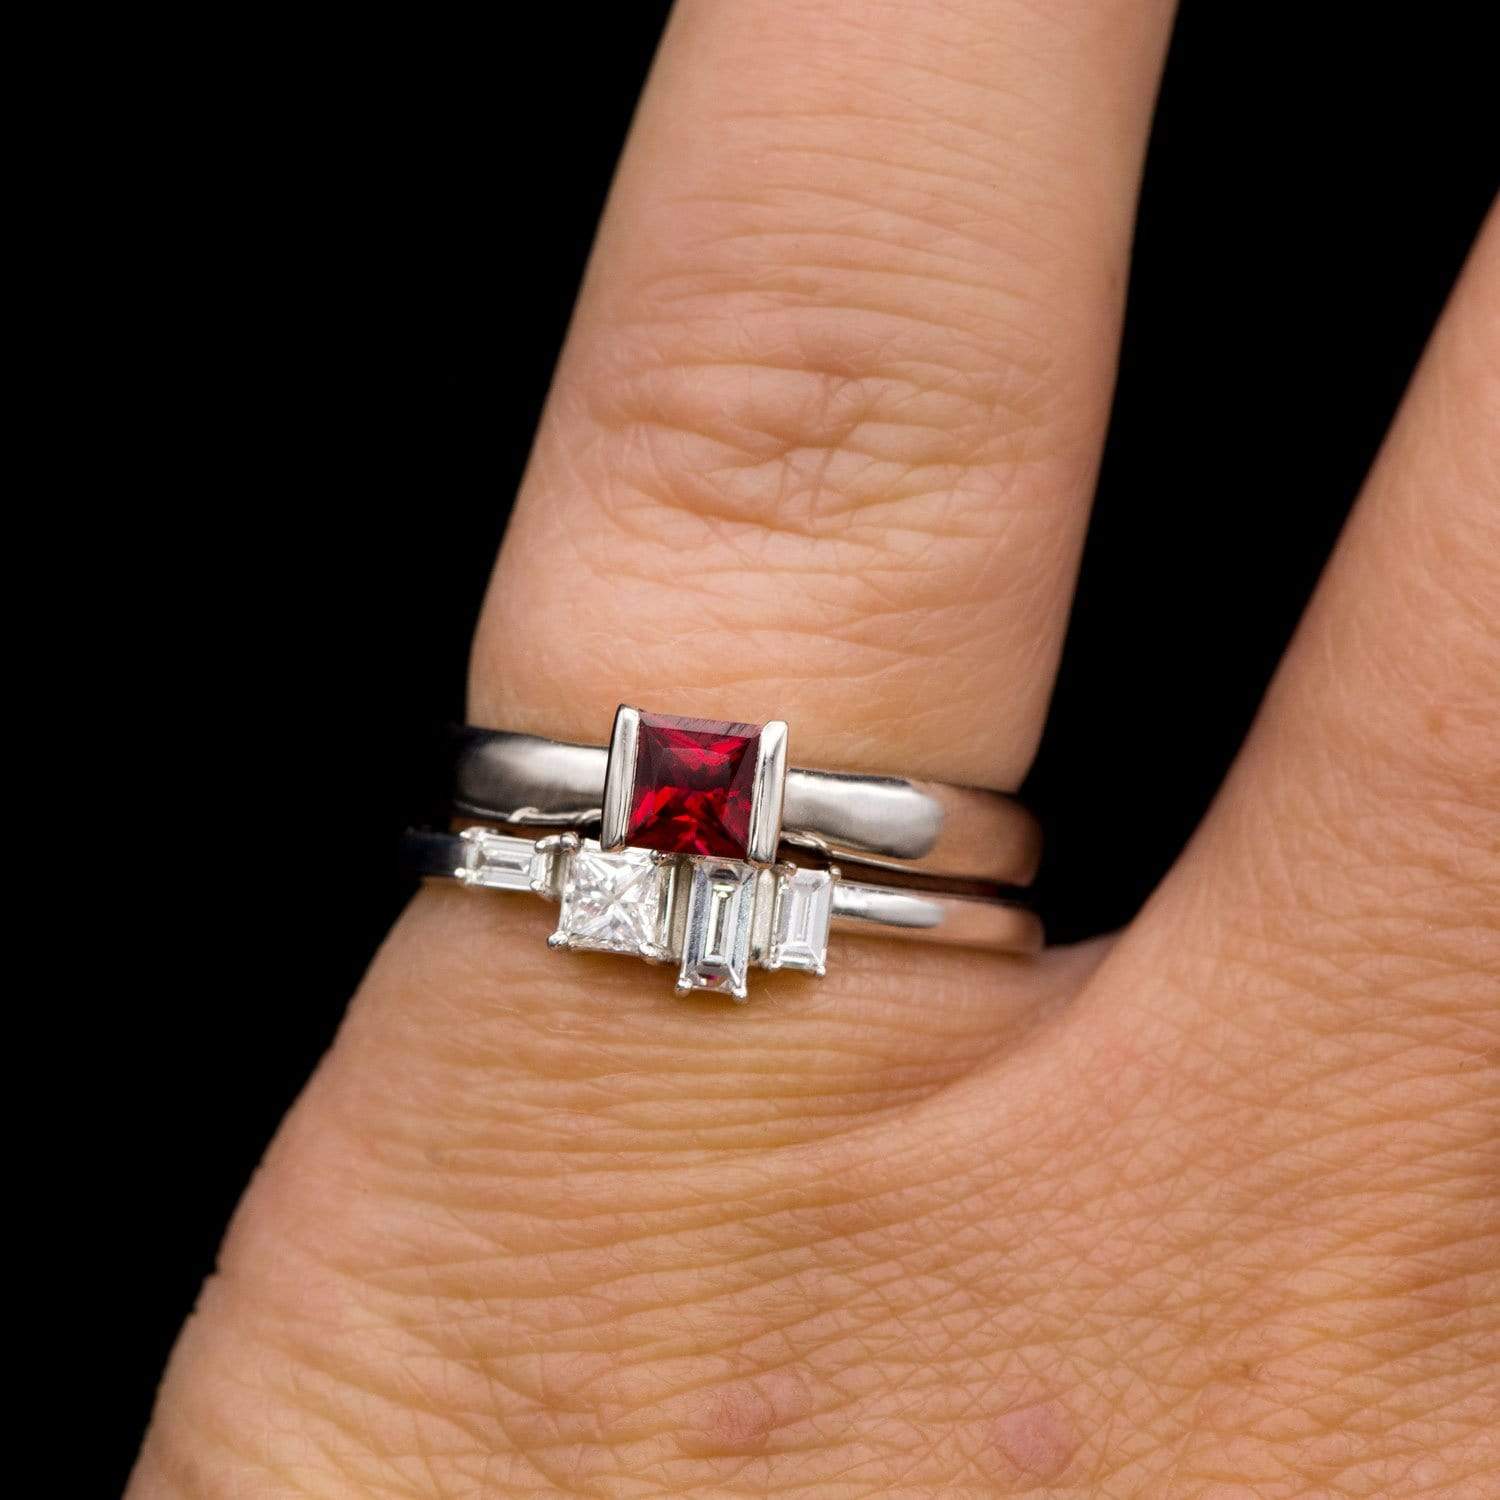 Georgia Ring - Geometric Cluster Baguette & Princess Cut Diamond, Ruby, Alexandrite or Sapphire Stacking Ring Ring by Nodeform